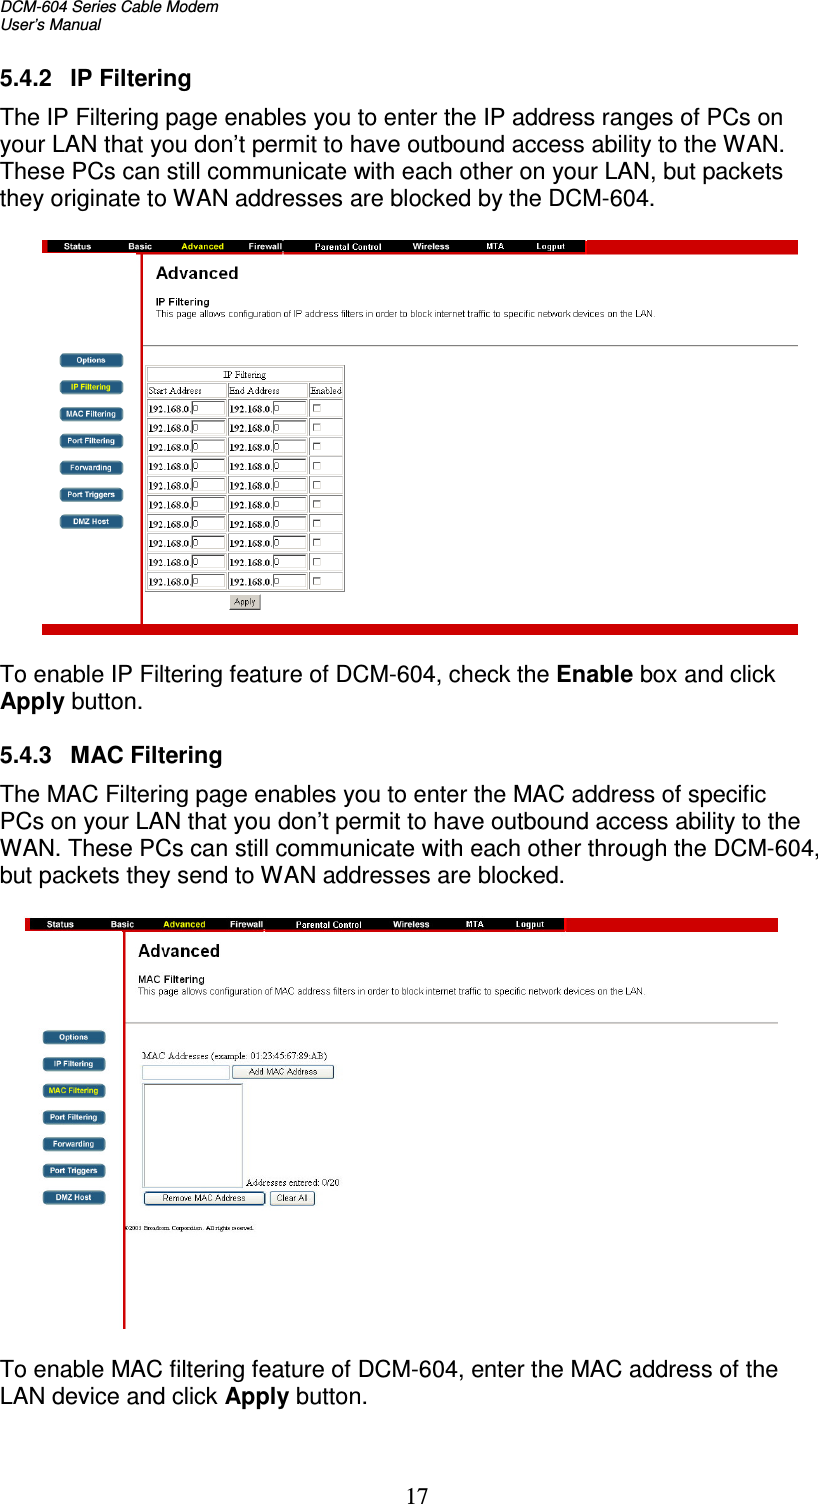 DCM-604 Series Cable Modem  User’s Manual   17 5.4.2  IP Filtering The IP Filtering page enables you to enter the IP address ranges of PCs on your LAN that you don’t permit to have outbound access ability to the WAN. These PCs can still communicate with each other on your LAN, but packets they originate to WAN addresses are blocked by the DCM-604.    To enable IP Filtering feature of DCM-604, check the Enable box and click Apply button.  5.4.3  MAC Filtering The MAC Filtering page enables you to enter the MAC address of specific PCs on your LAN that you don’t permit to have outbound access ability to the WAN. These PCs can still communicate with each other through the DCM-604, but packets they send to WAN addresses are blocked.    To enable MAC filtering feature of DCM-604, enter the MAC address of the LAN device and click Apply button.  